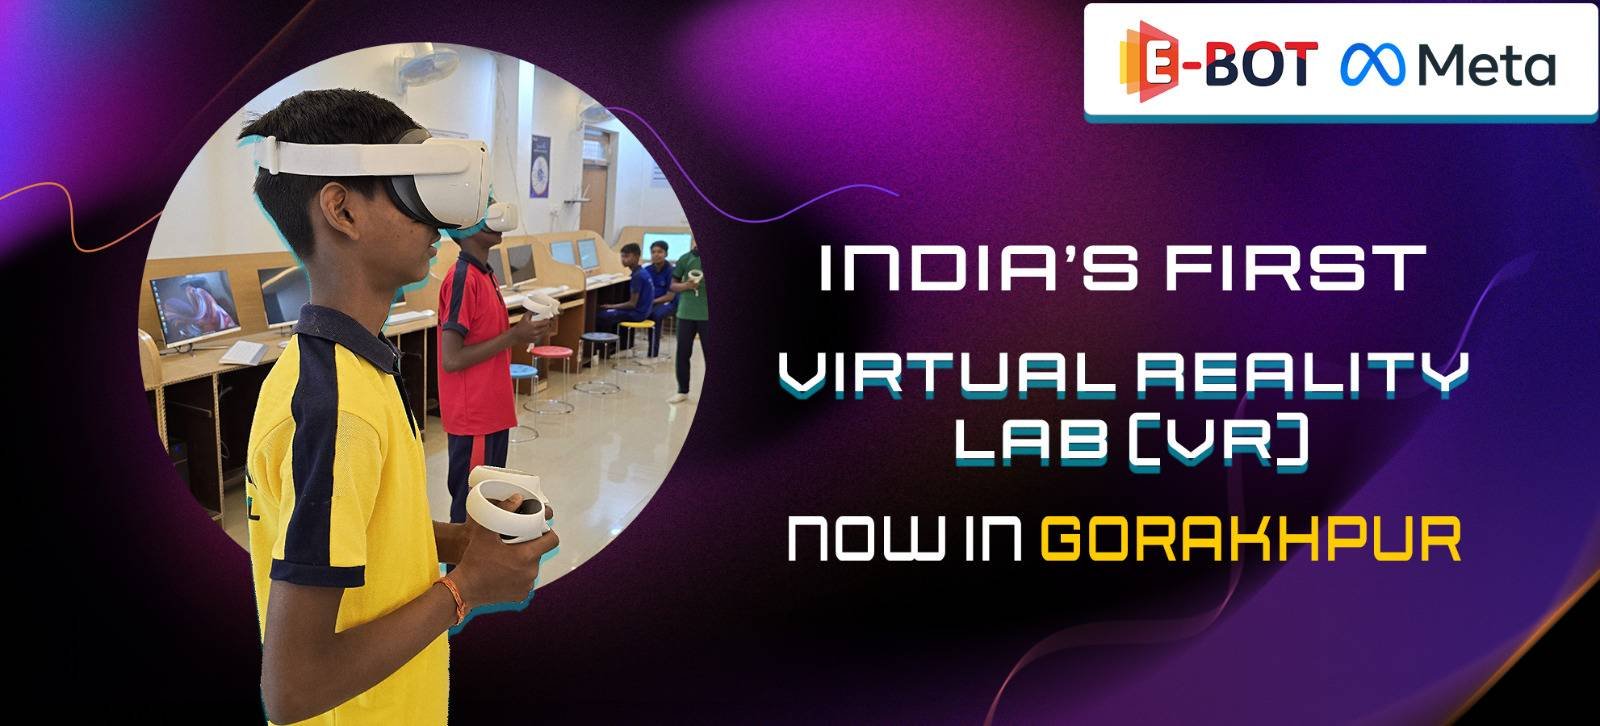 India's first virual reality lab